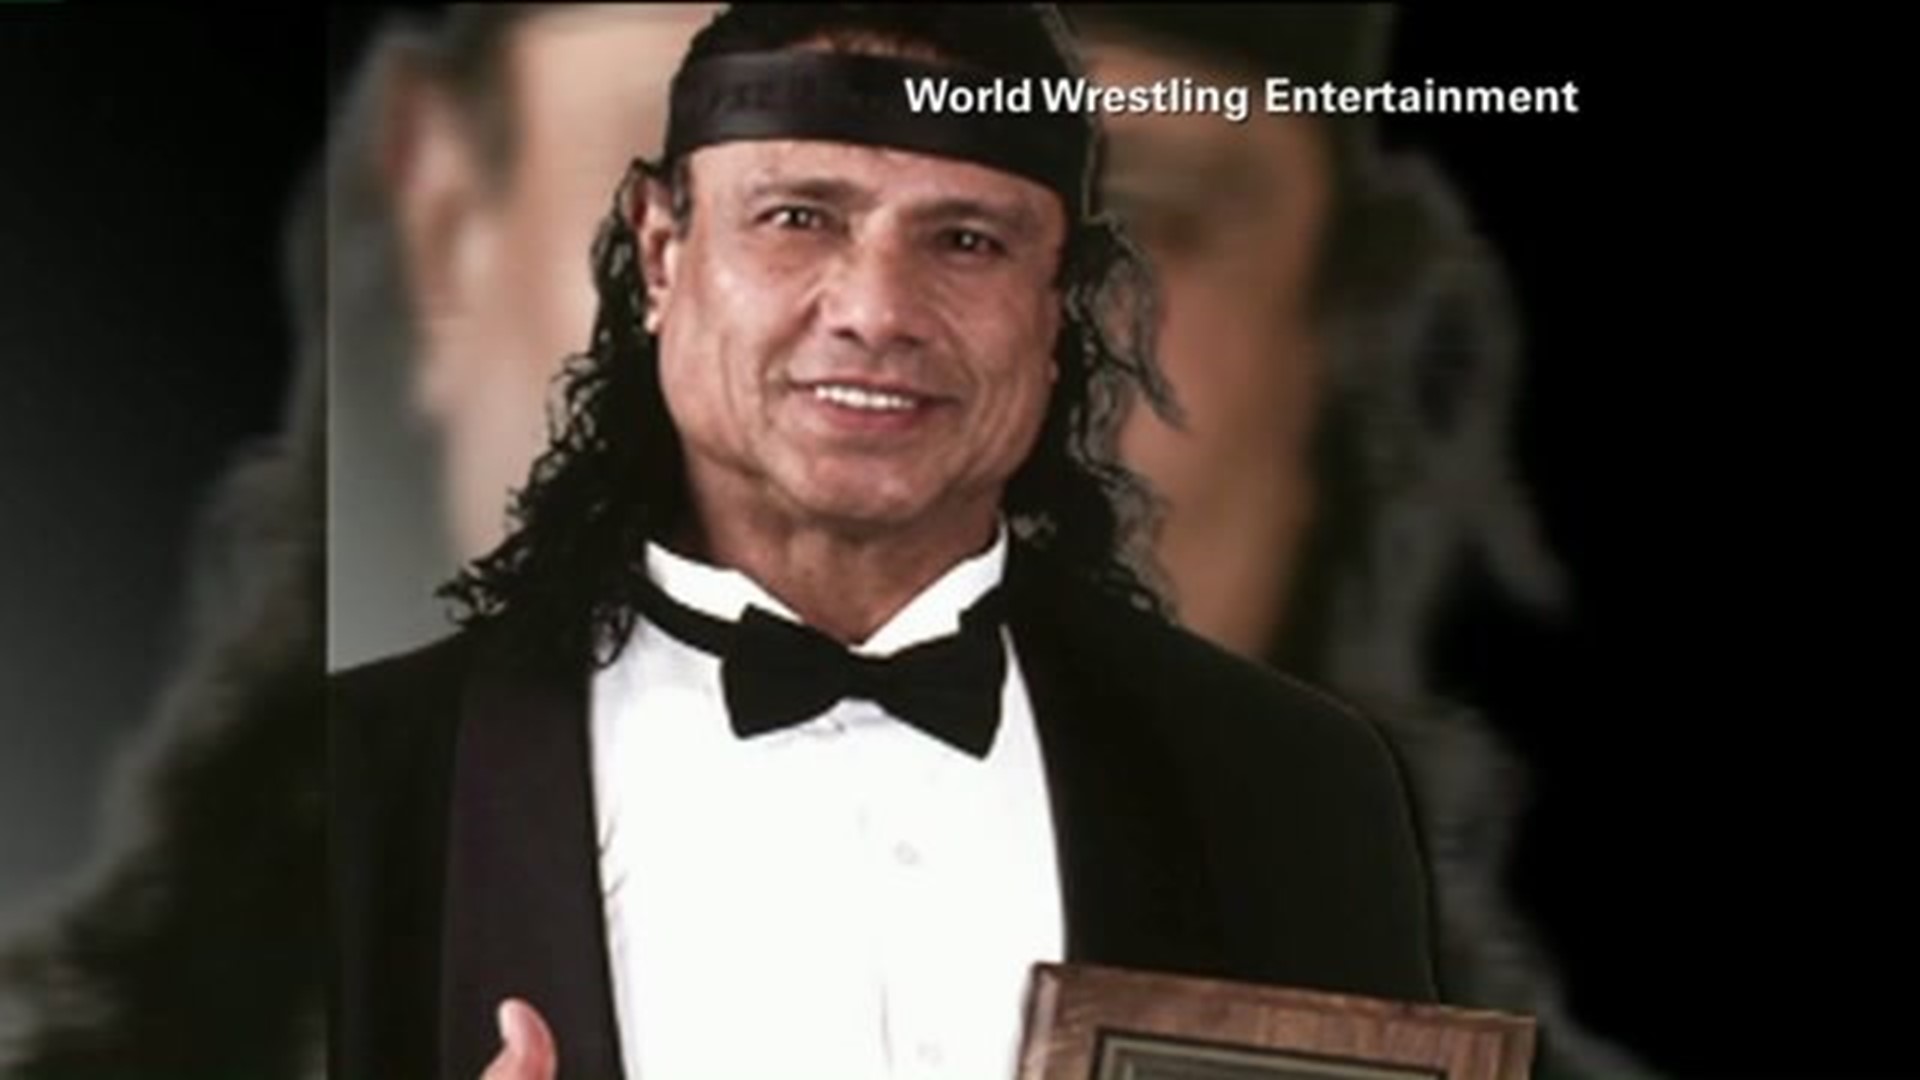 Jimmy 'Superfly' Snuka, WWE Hall of Fame Wrestler, Dead at 73